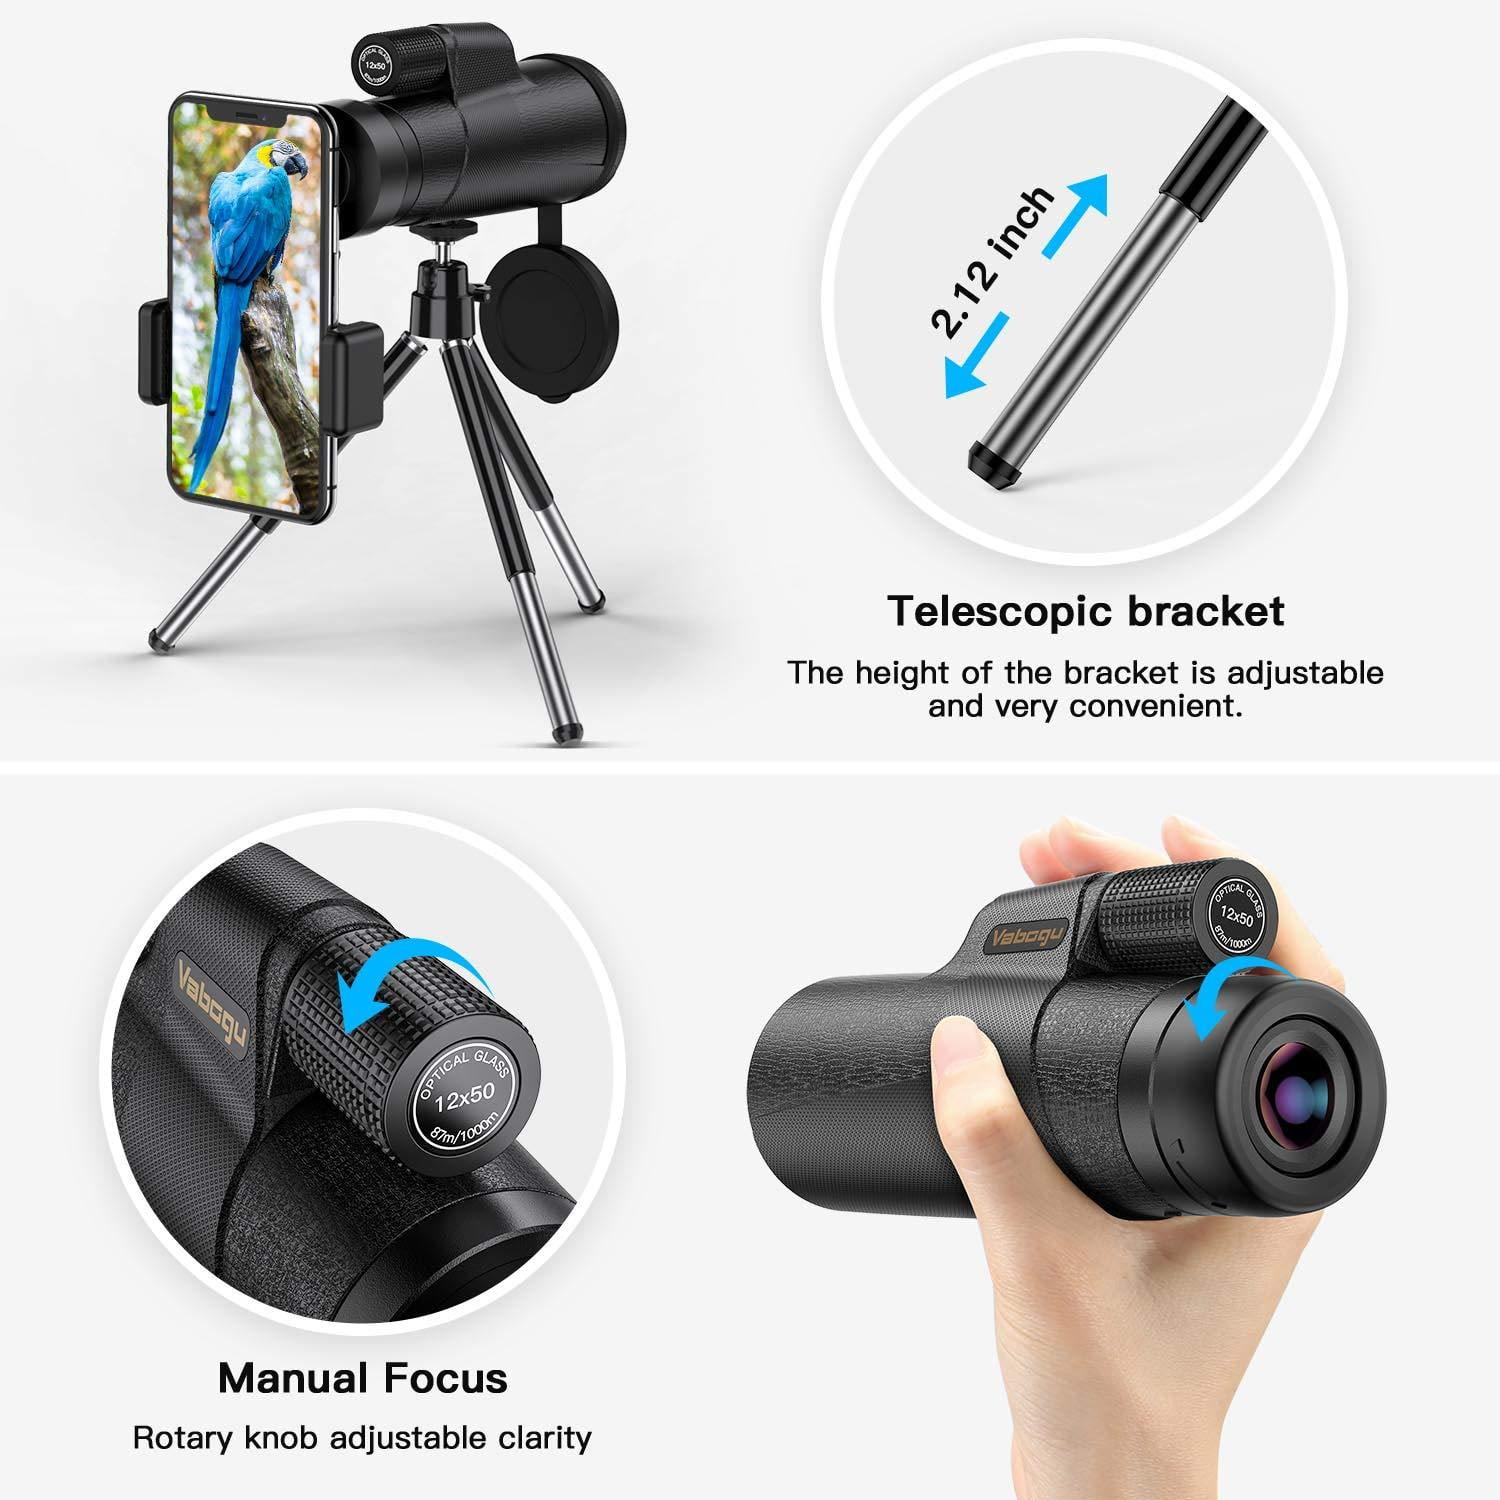 HD Monocular Telescope with Smartphone Holder,12x50 High Definition BAK4 Prism Waterproof Monocular for Adult Bird Watching Camping Wild Life Scenery Hiking Black 